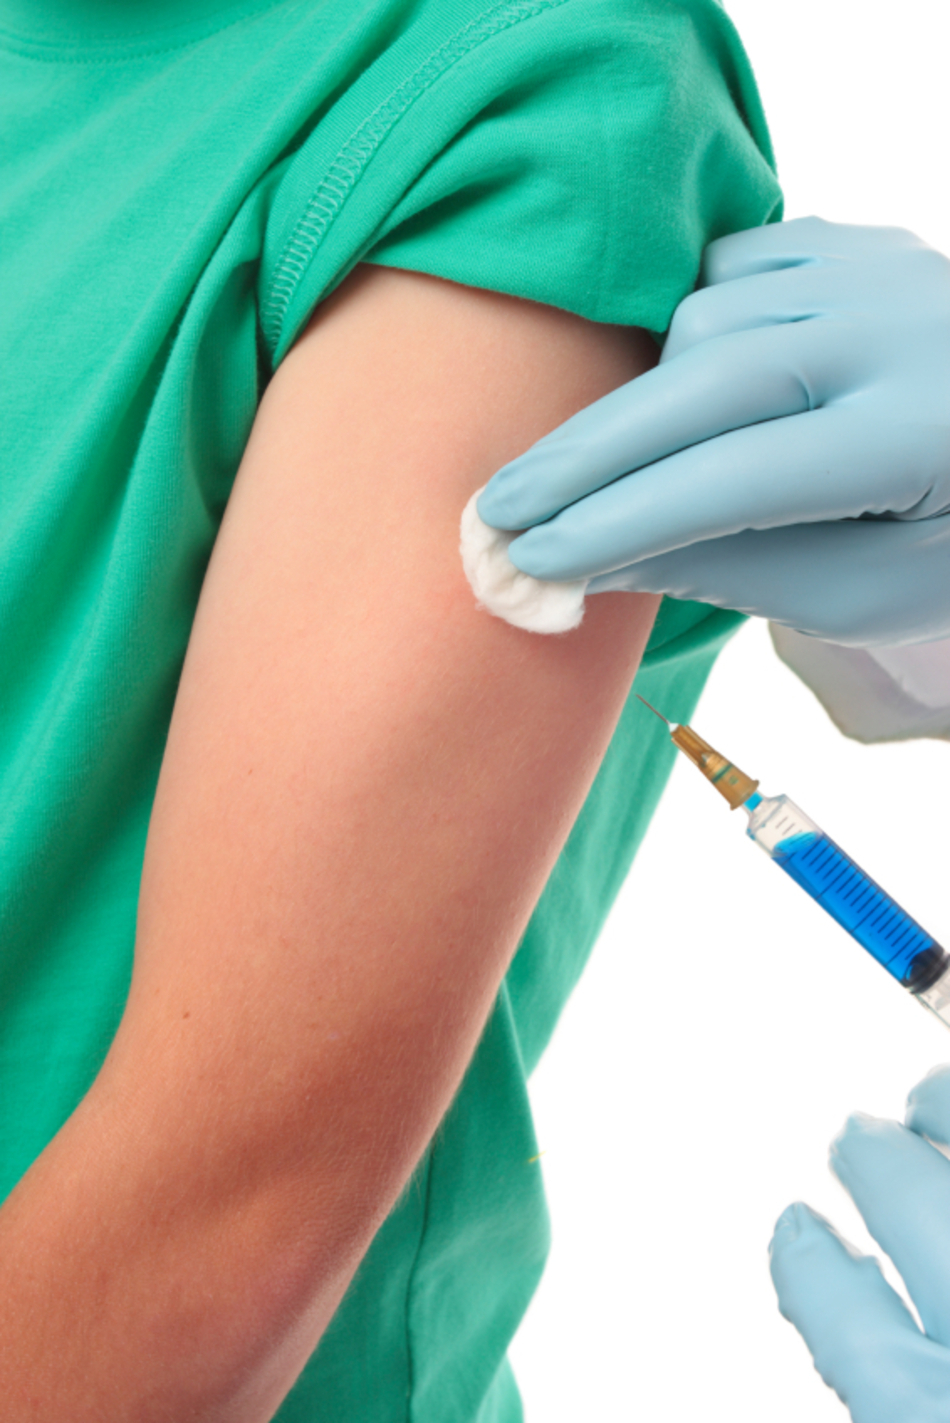 Tips for Keeping Your Child’s Vaccinations Up-to-Date